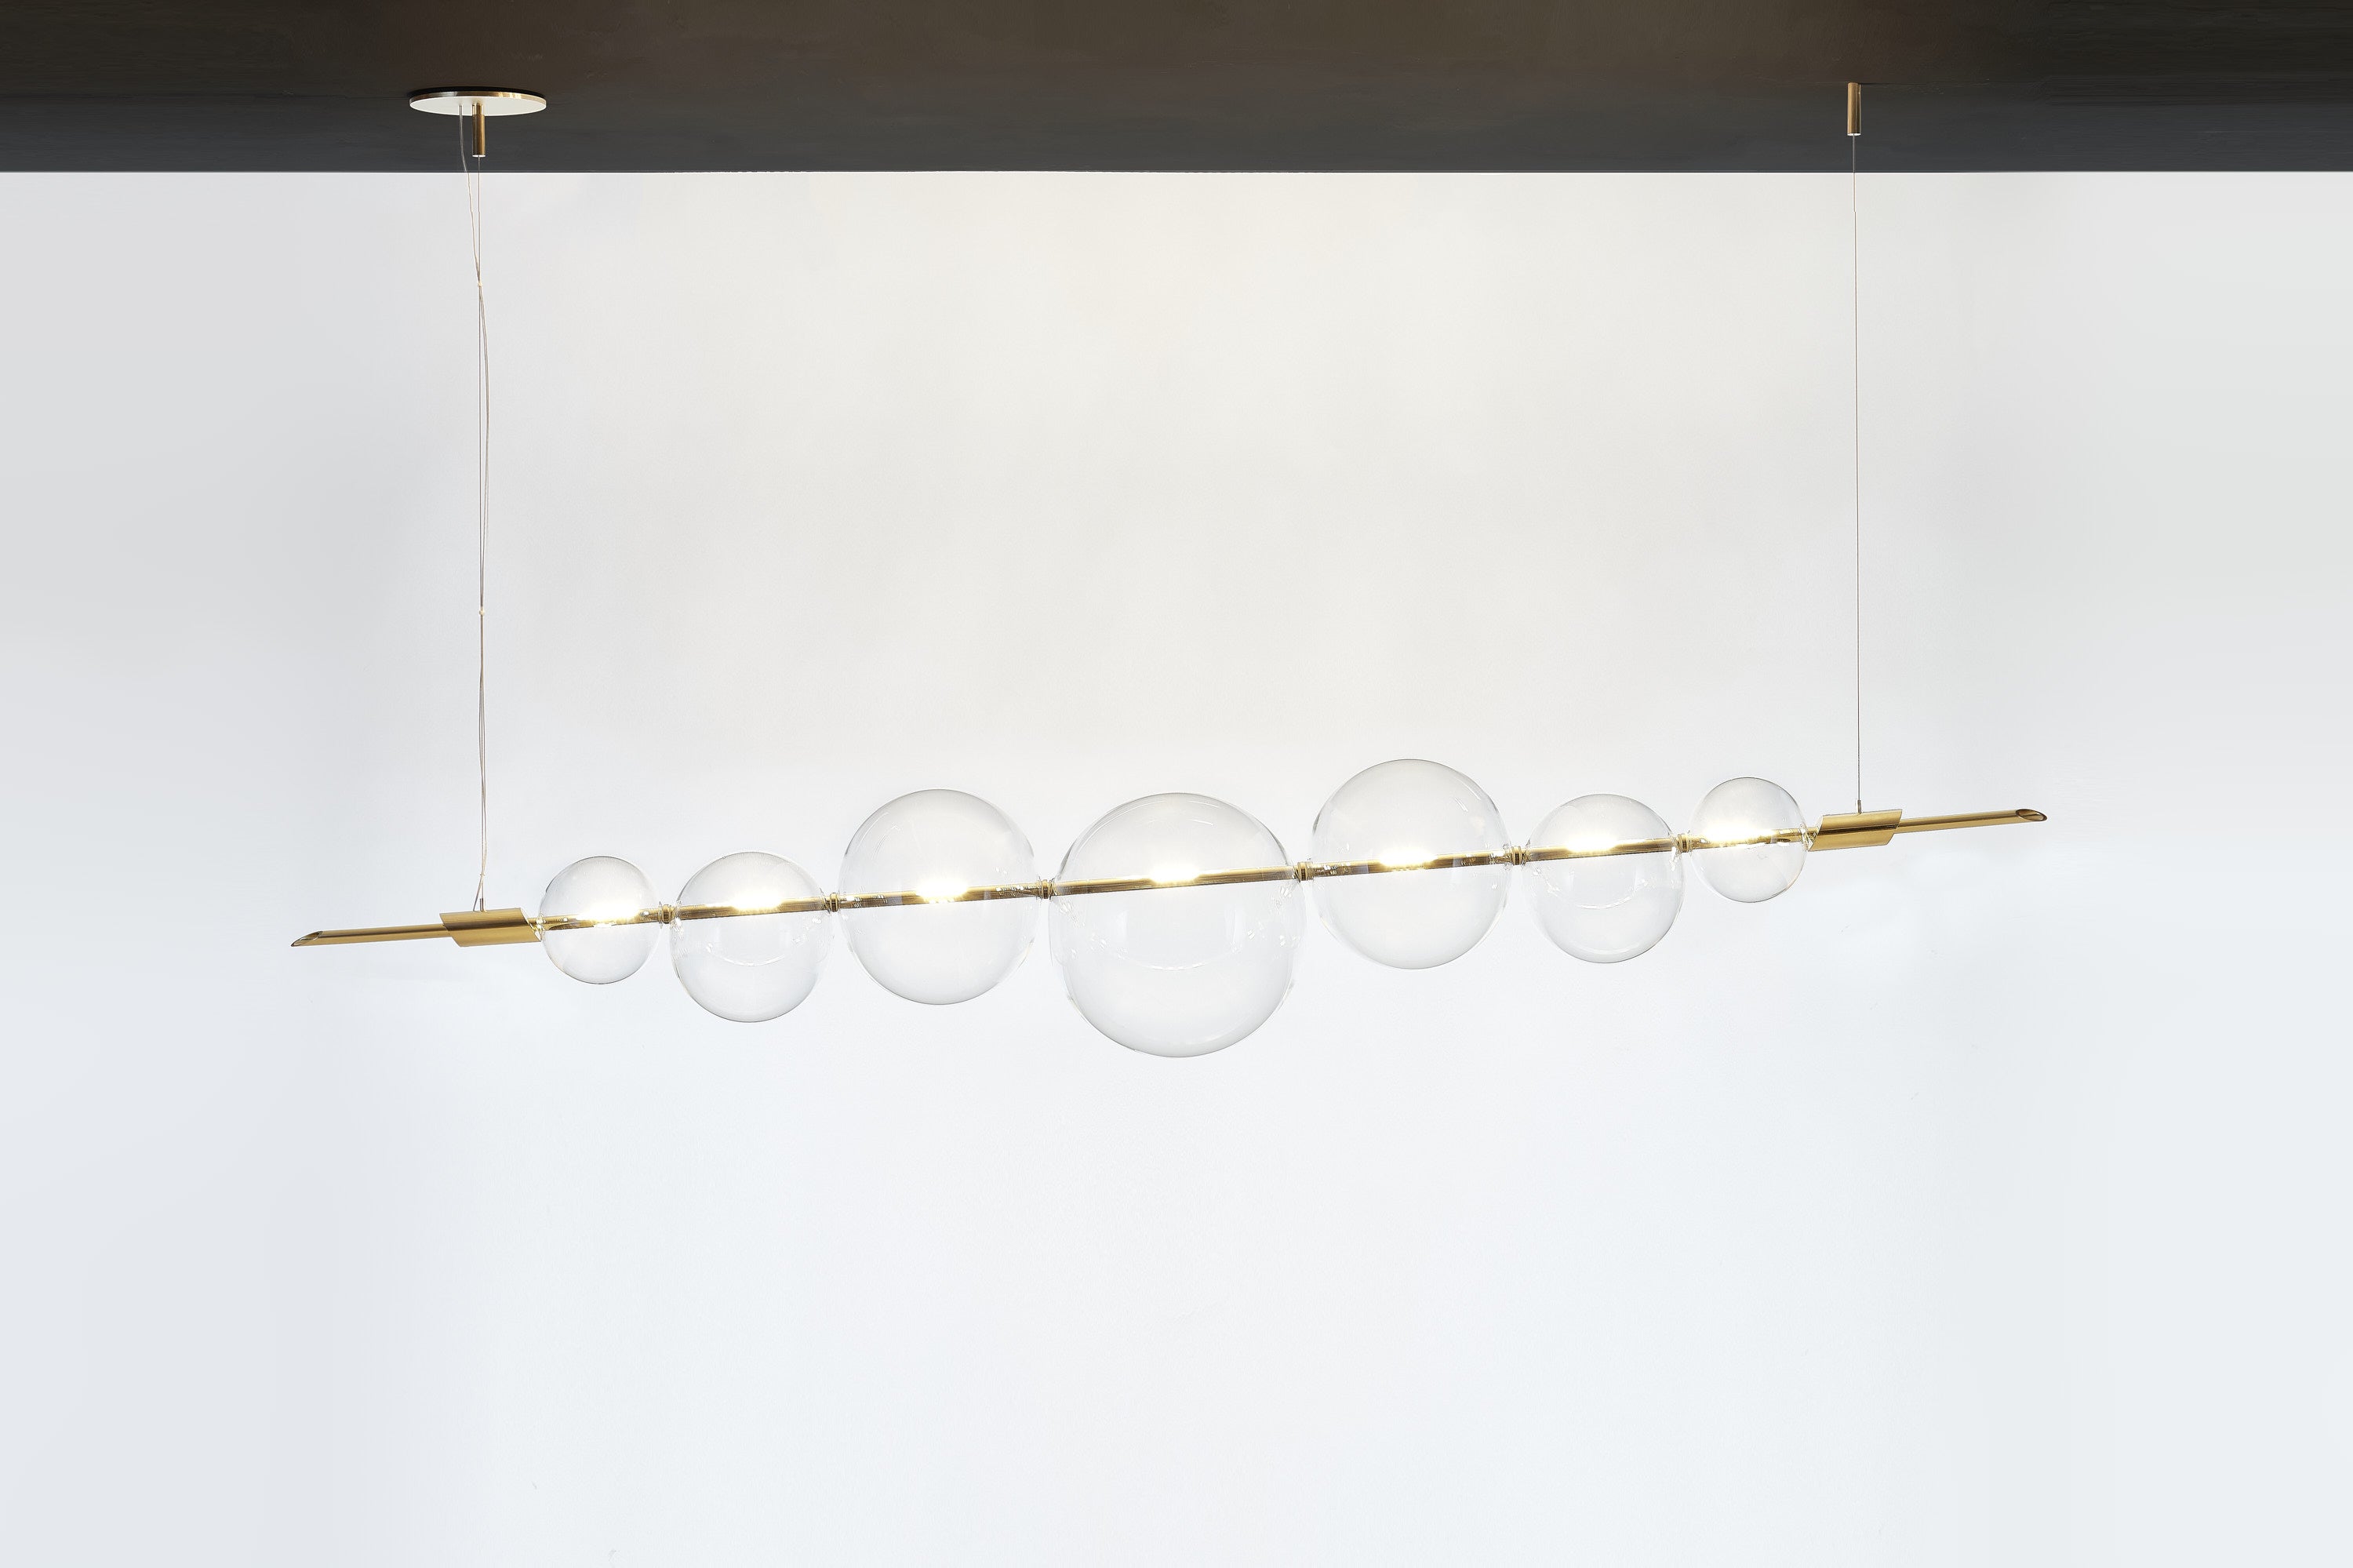 An exquisite exercise in balance, this chandelier exudes a Minimalist flair marked by clean and essential lines. Its dimmable structure features two brass bars hanging from a brass ceiling rose, and strikingly balancing a series of delicate spheres